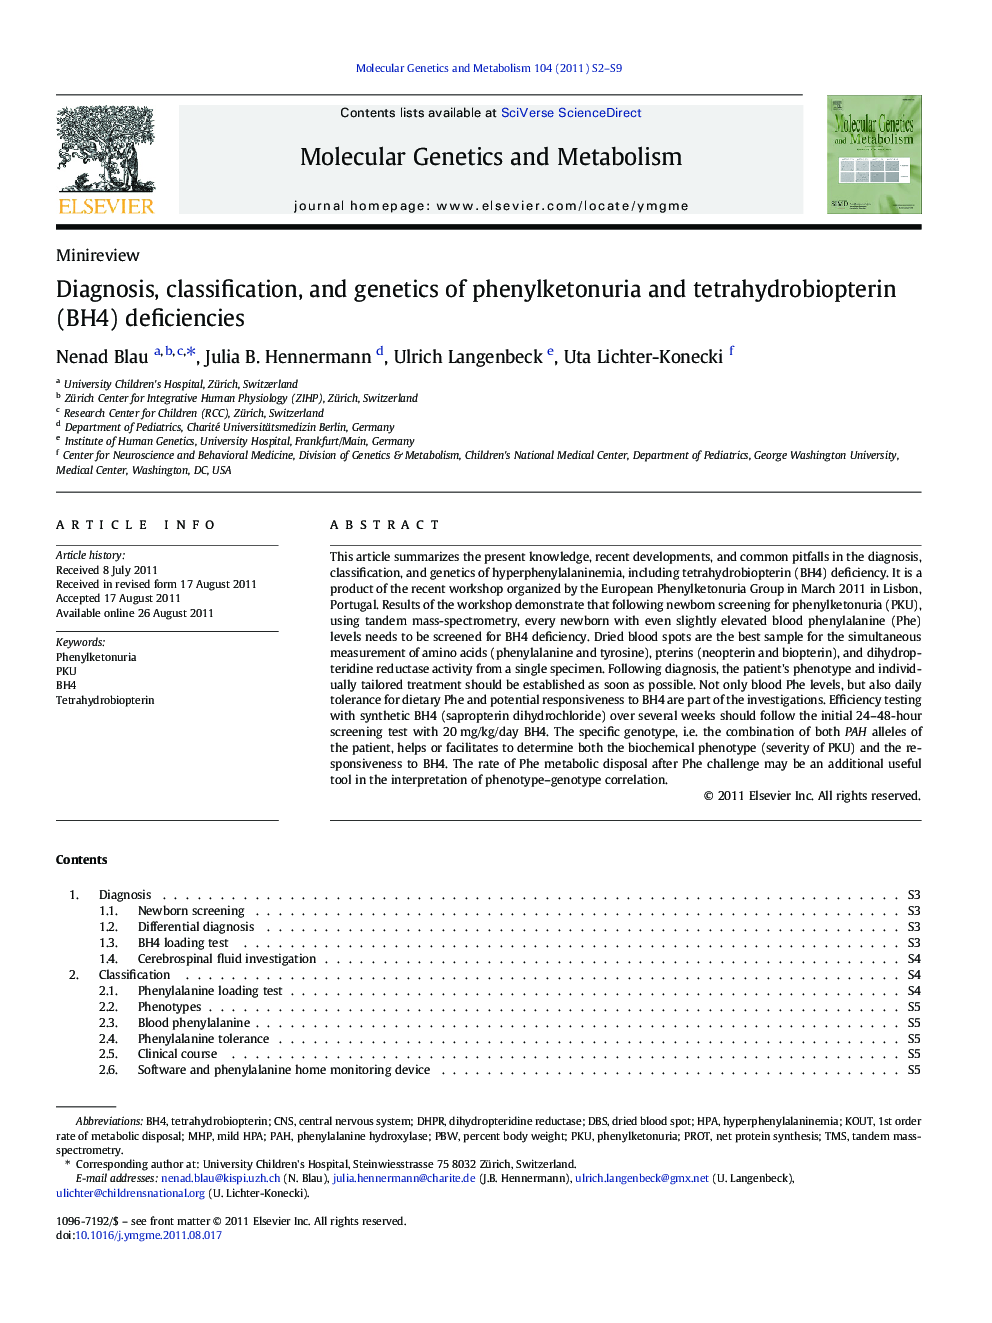 Diagnosis, classification, and genetics of phenylketonuria and tetrahydrobiopterin (BH4) deficiencies